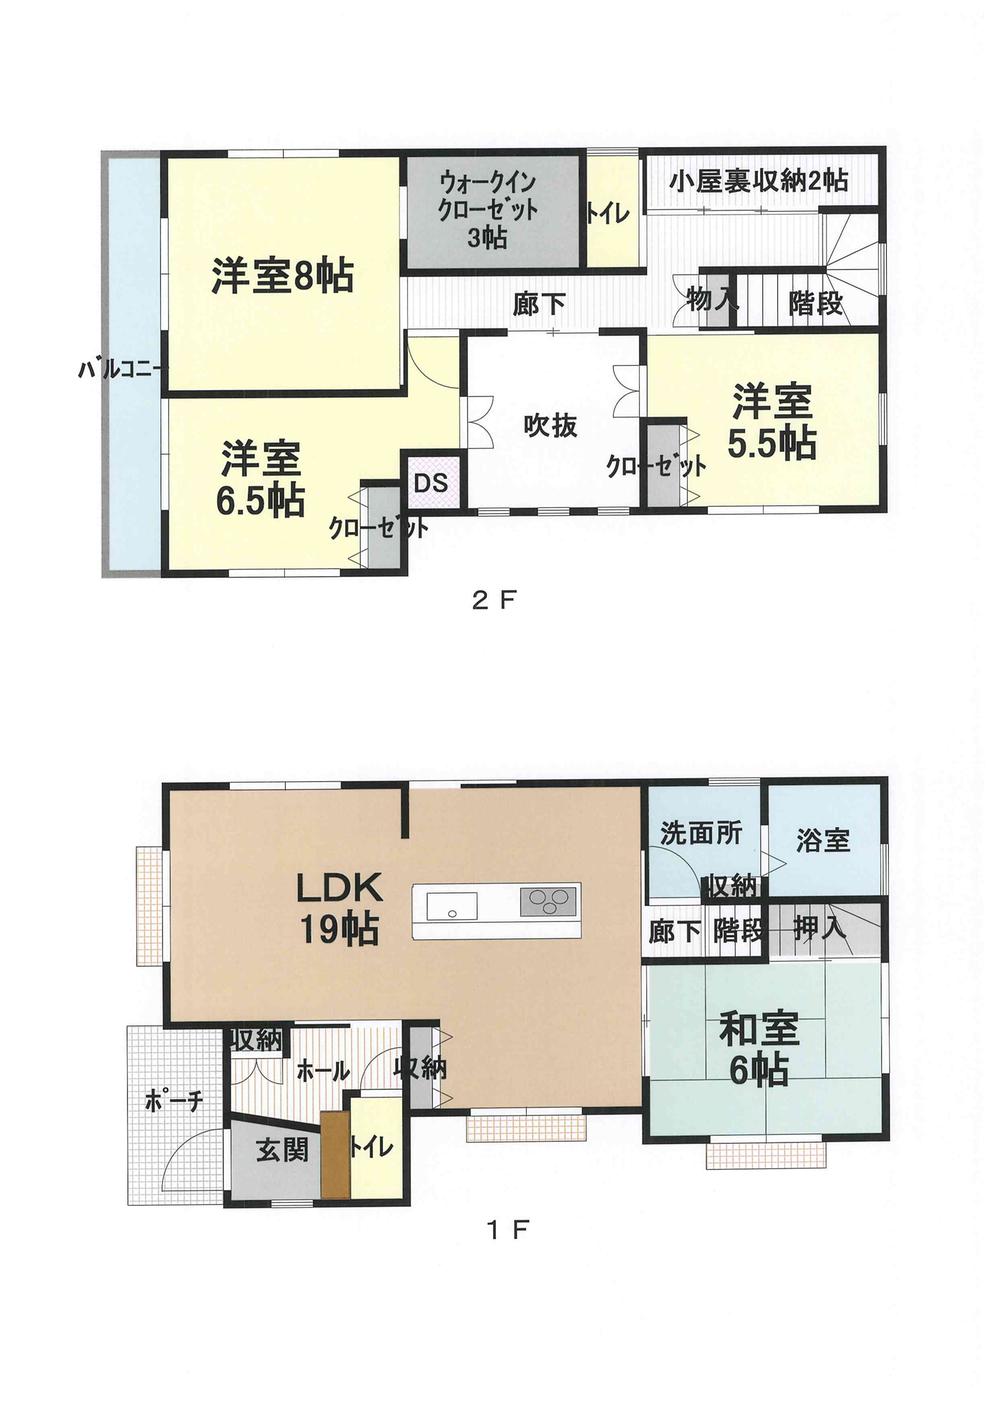 Building plan example (floor plan). Island Kitchen adoption of the LDK 19 Pledge. WIC3 Pledge, Hut UrabutsuIri 2 Pledge, All room storage, In addition we plan drawings with plenty of storage in the key point (ready-built format can also be consulted)! 